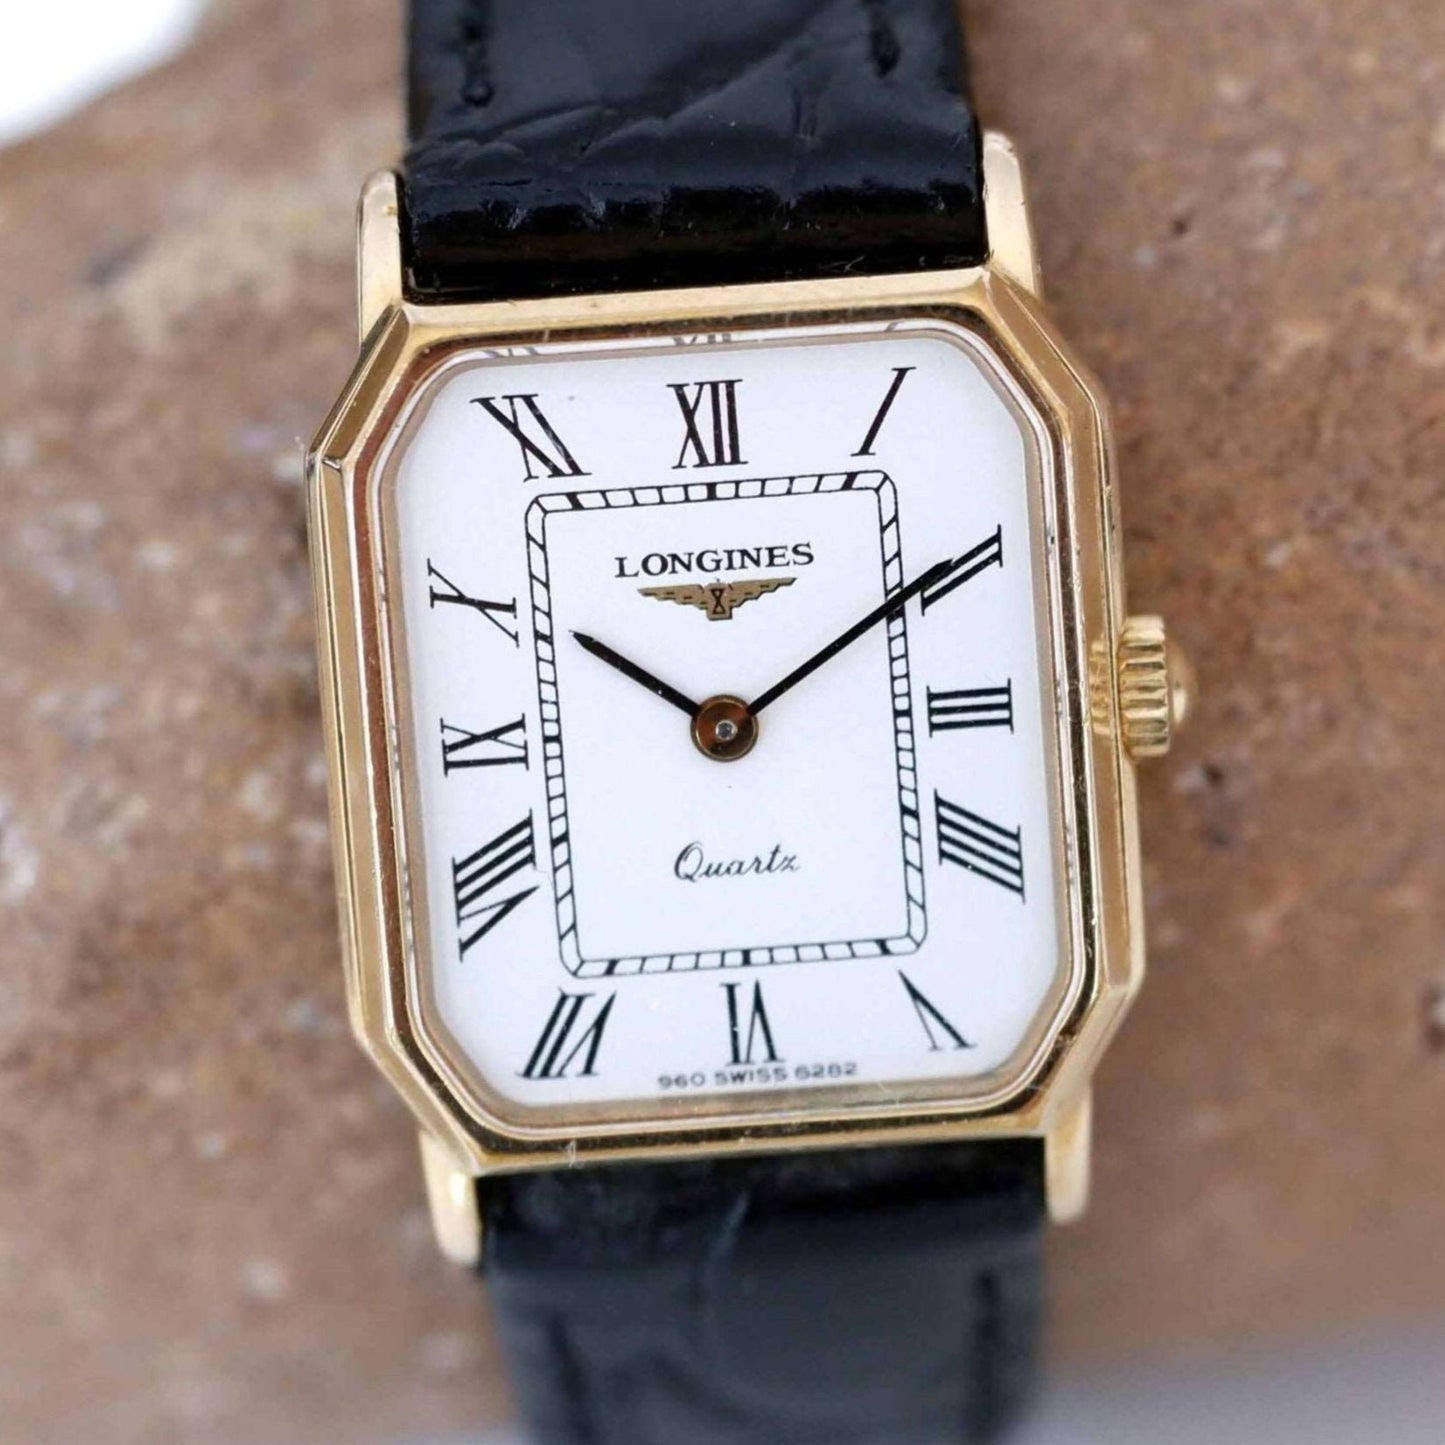 Longines Vintage Ladies Watch: 90s Golden, Rectangular with Roman Numerals | First Front Side